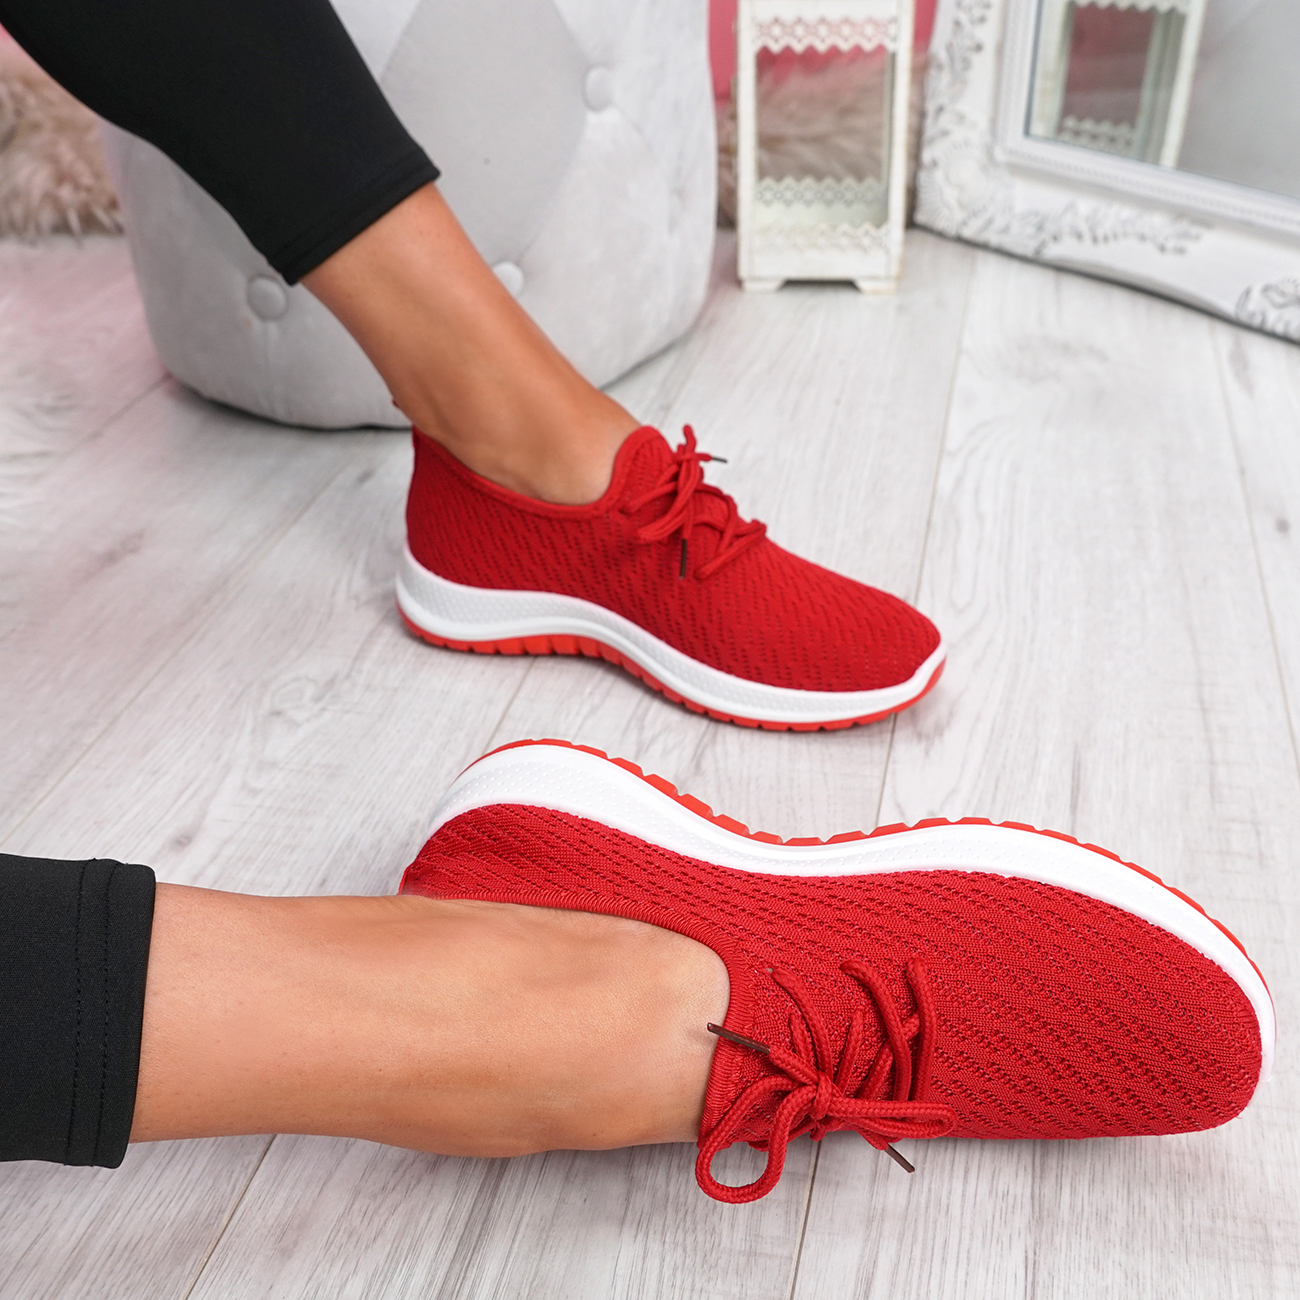 WOMENS LADIES KNIT TRAINERS SLIP ON SPORT SNEAKERS CASUAL RUNNING WOMEN ...